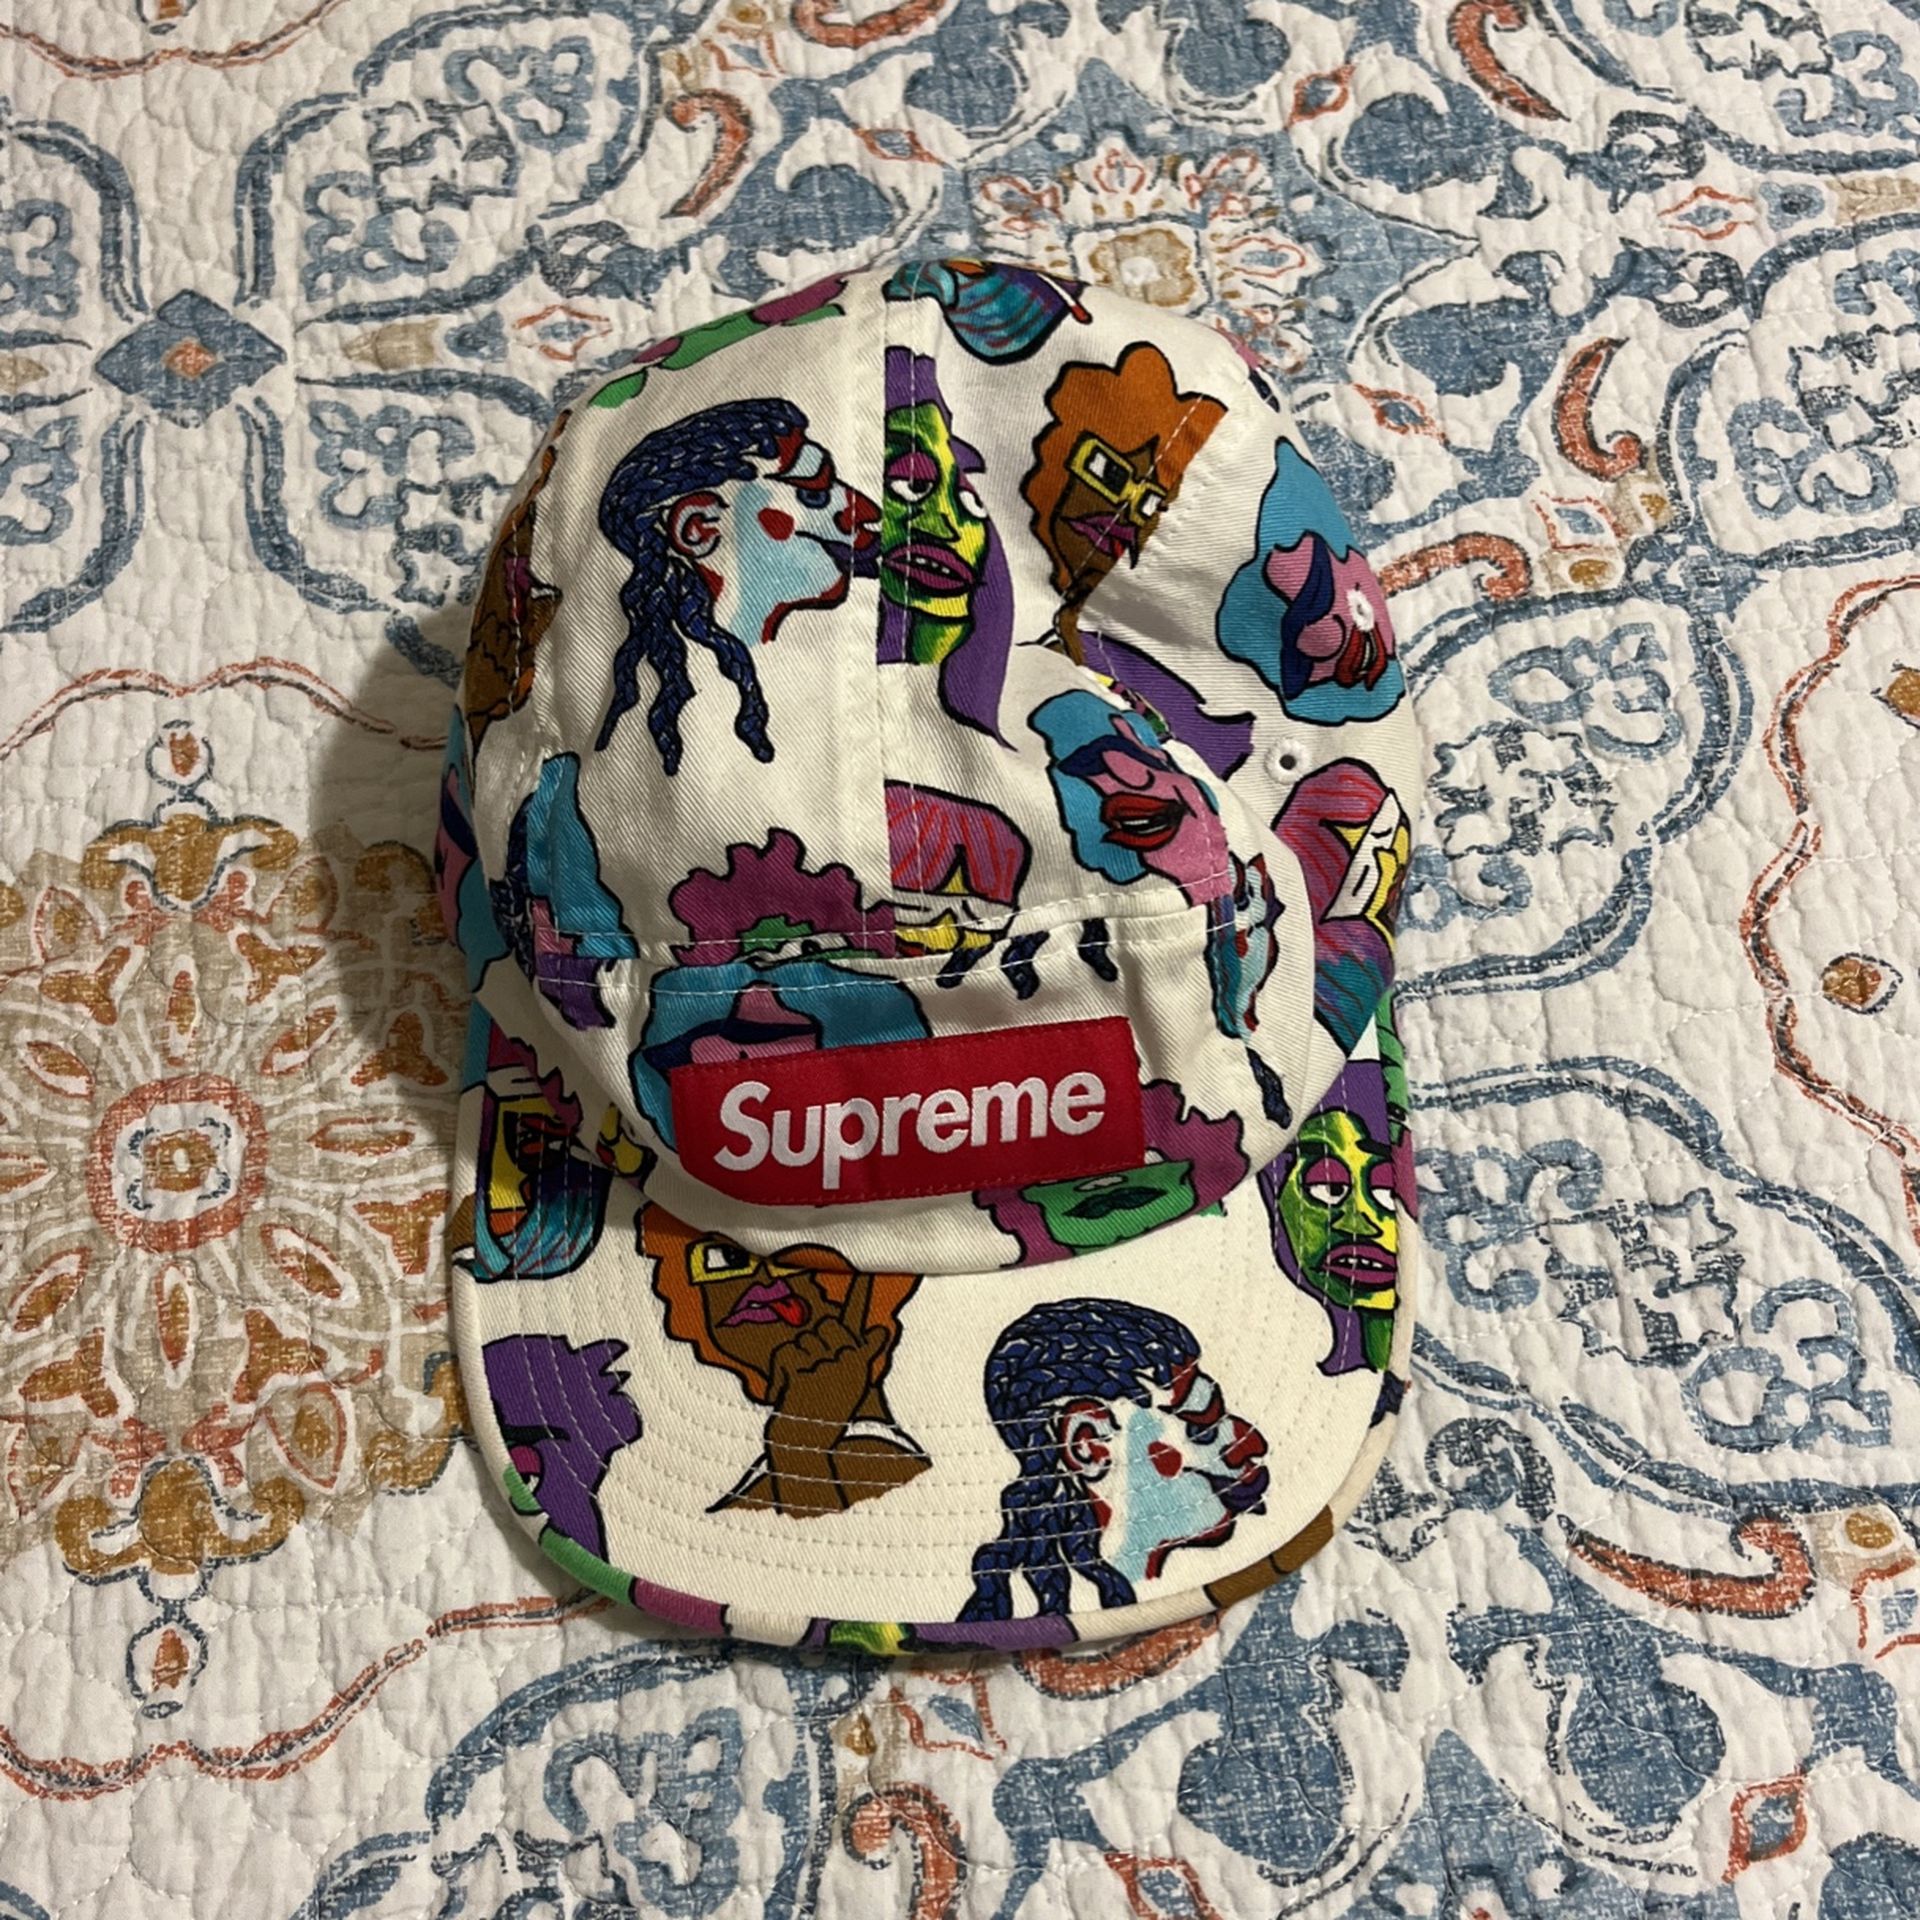 Supreme Hat / Cap Super Cool Trendy Design From Their First Day Of Opening In NYC Store Manhattan! 100% Authentic Original! 